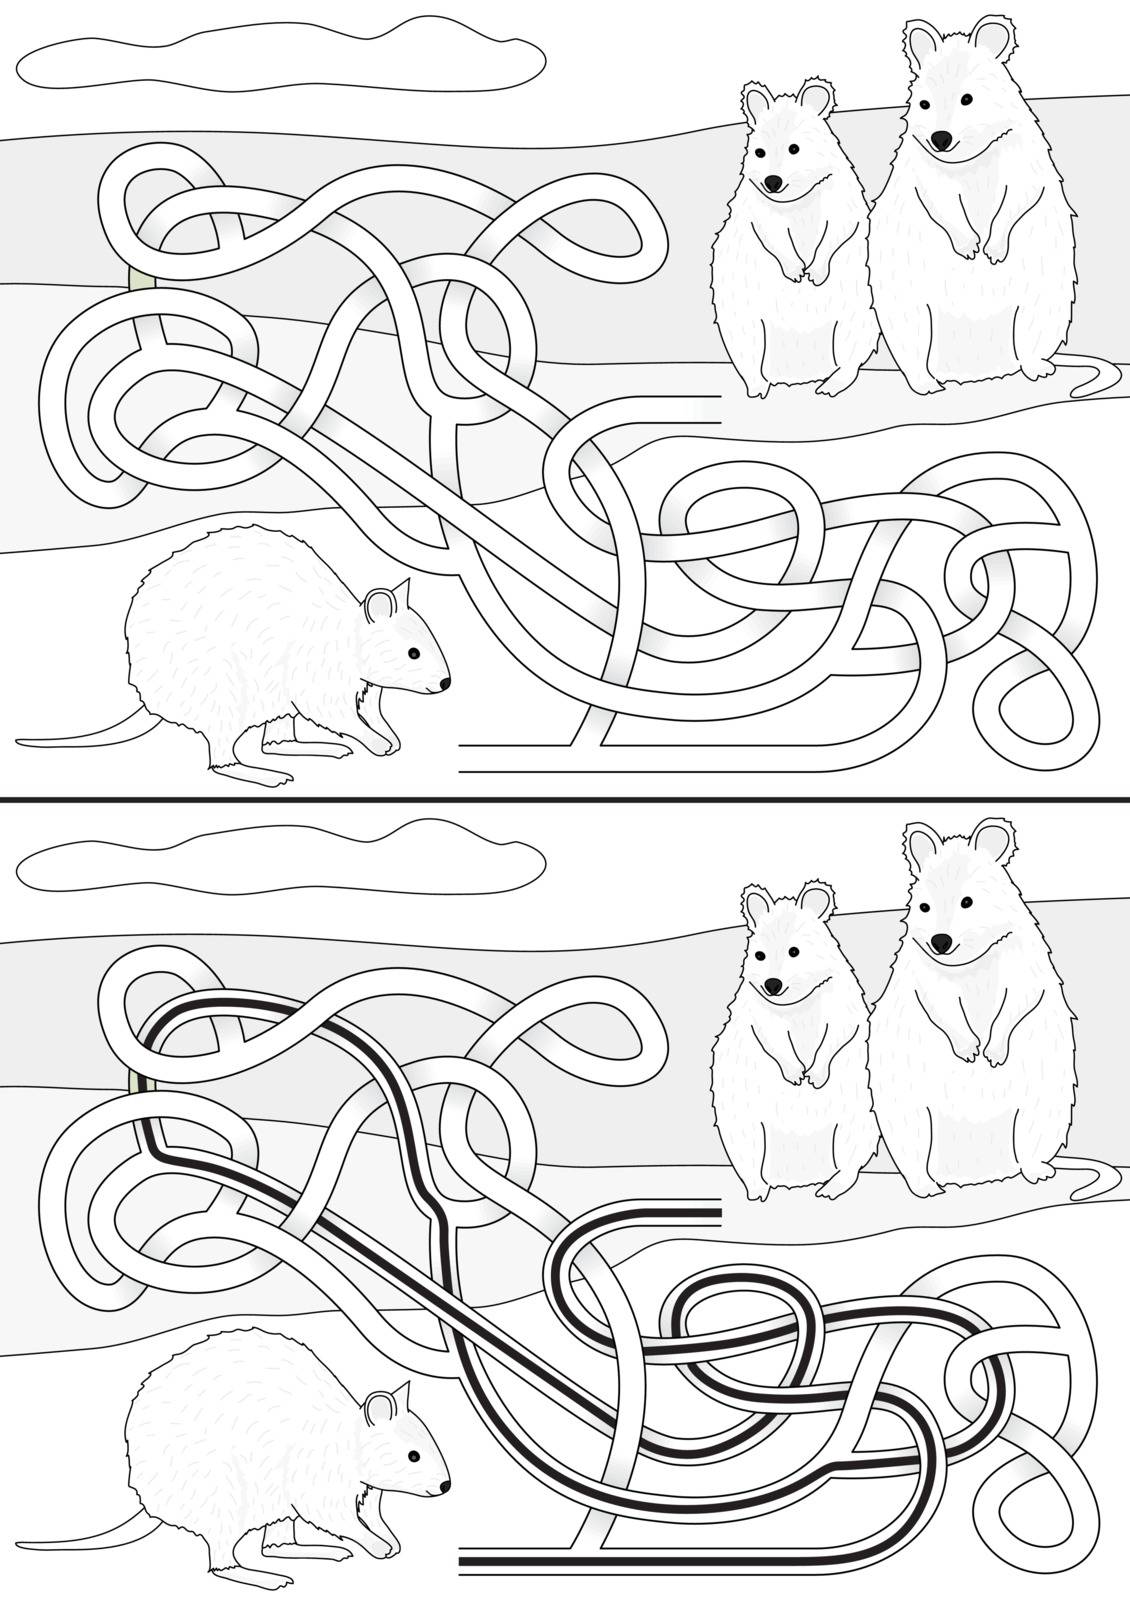 Quokka maze for kids with a solution in black and white